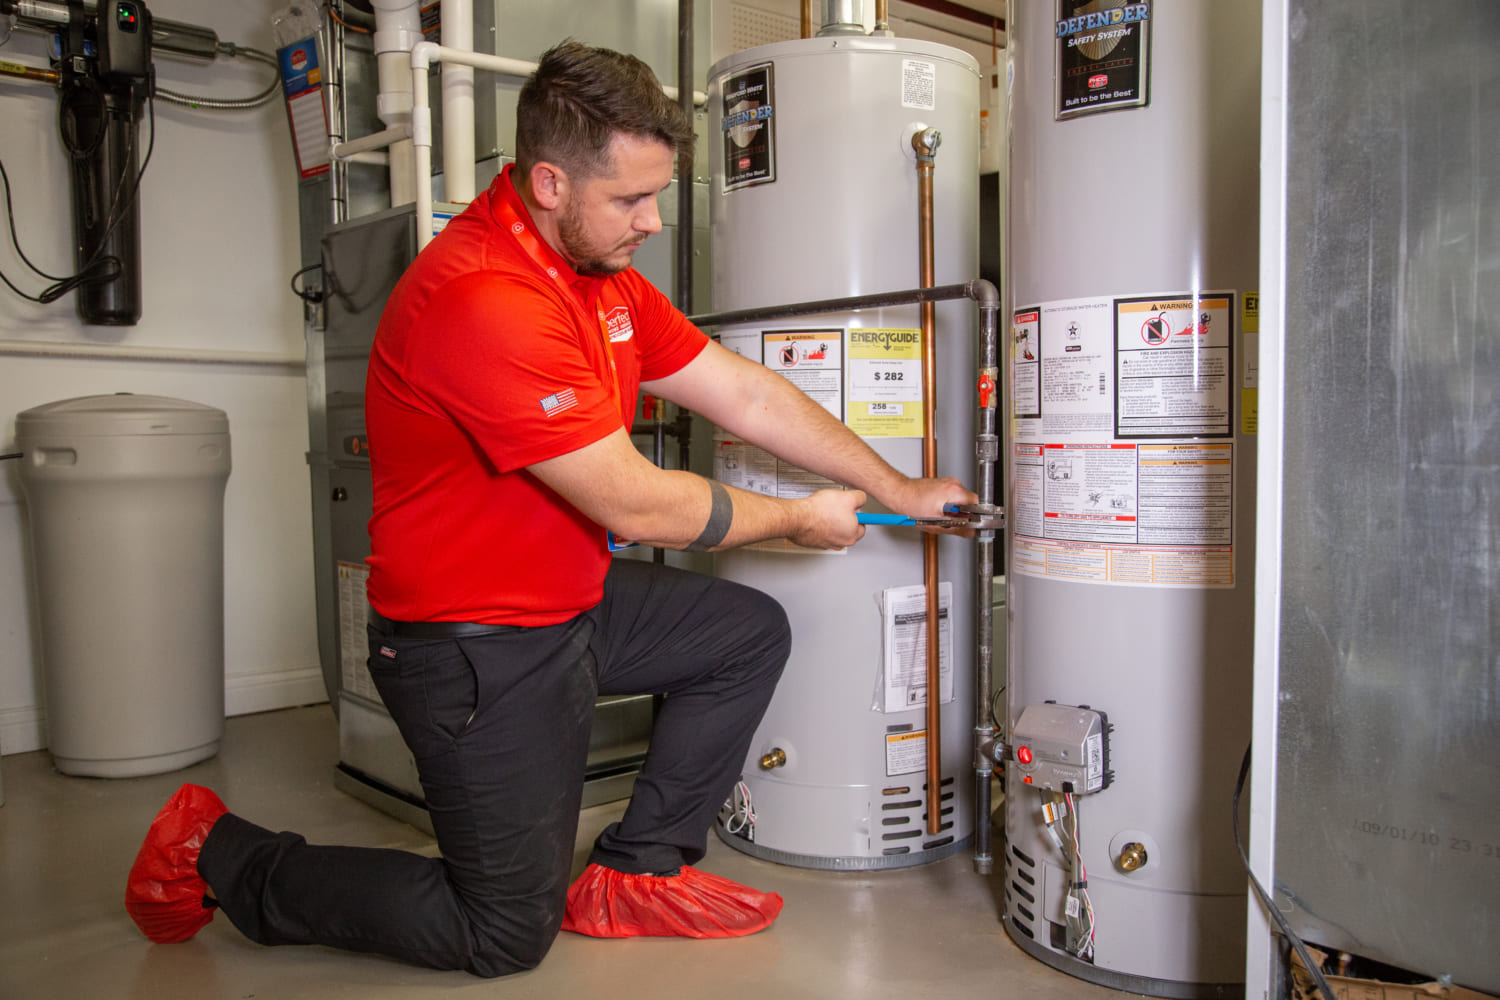 Perfect Home Service employee installing a conventional water heater in basement